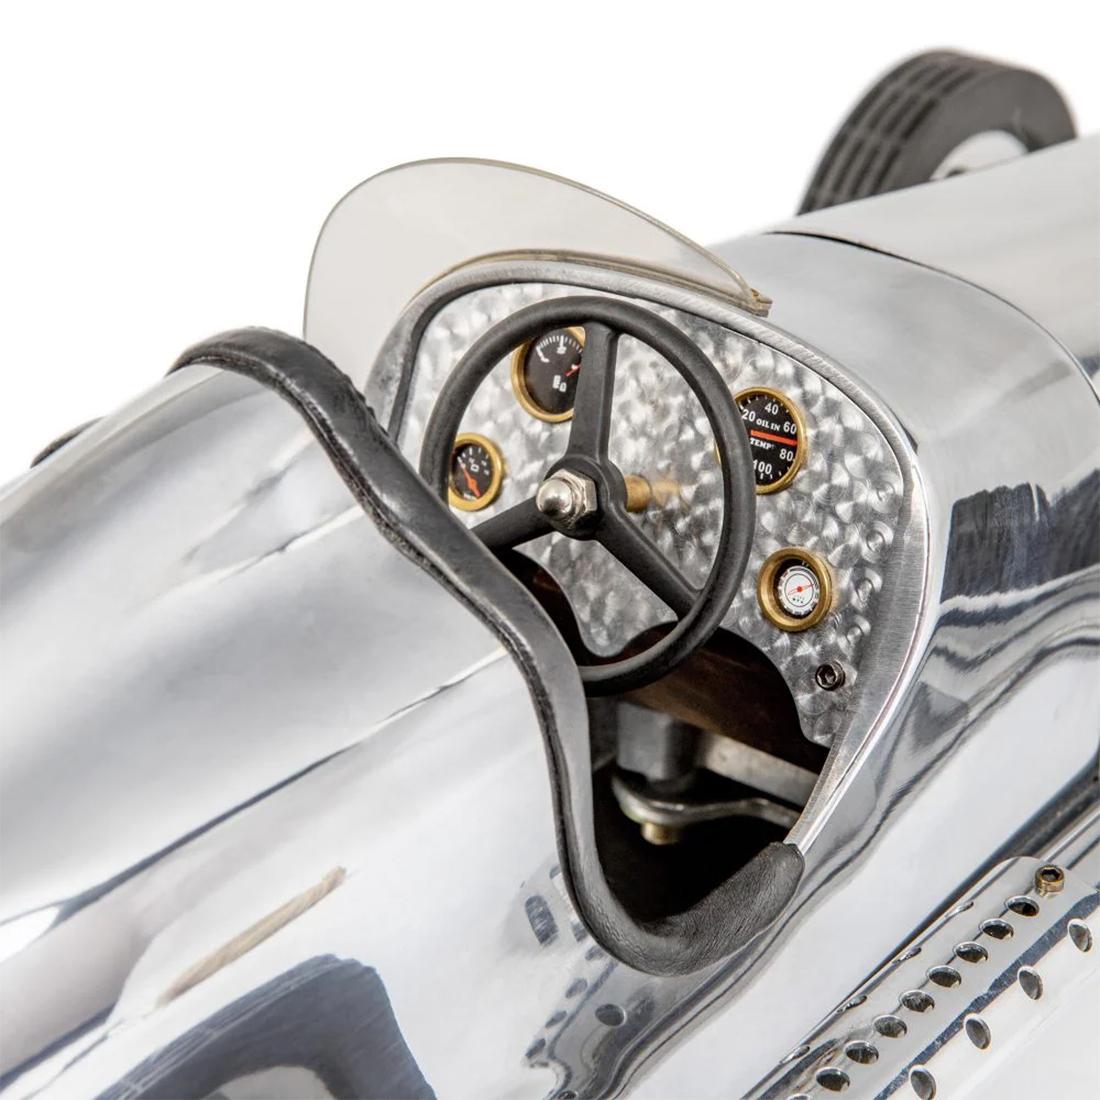 Aluminum Spindizzies Polished Racing Model For Sale